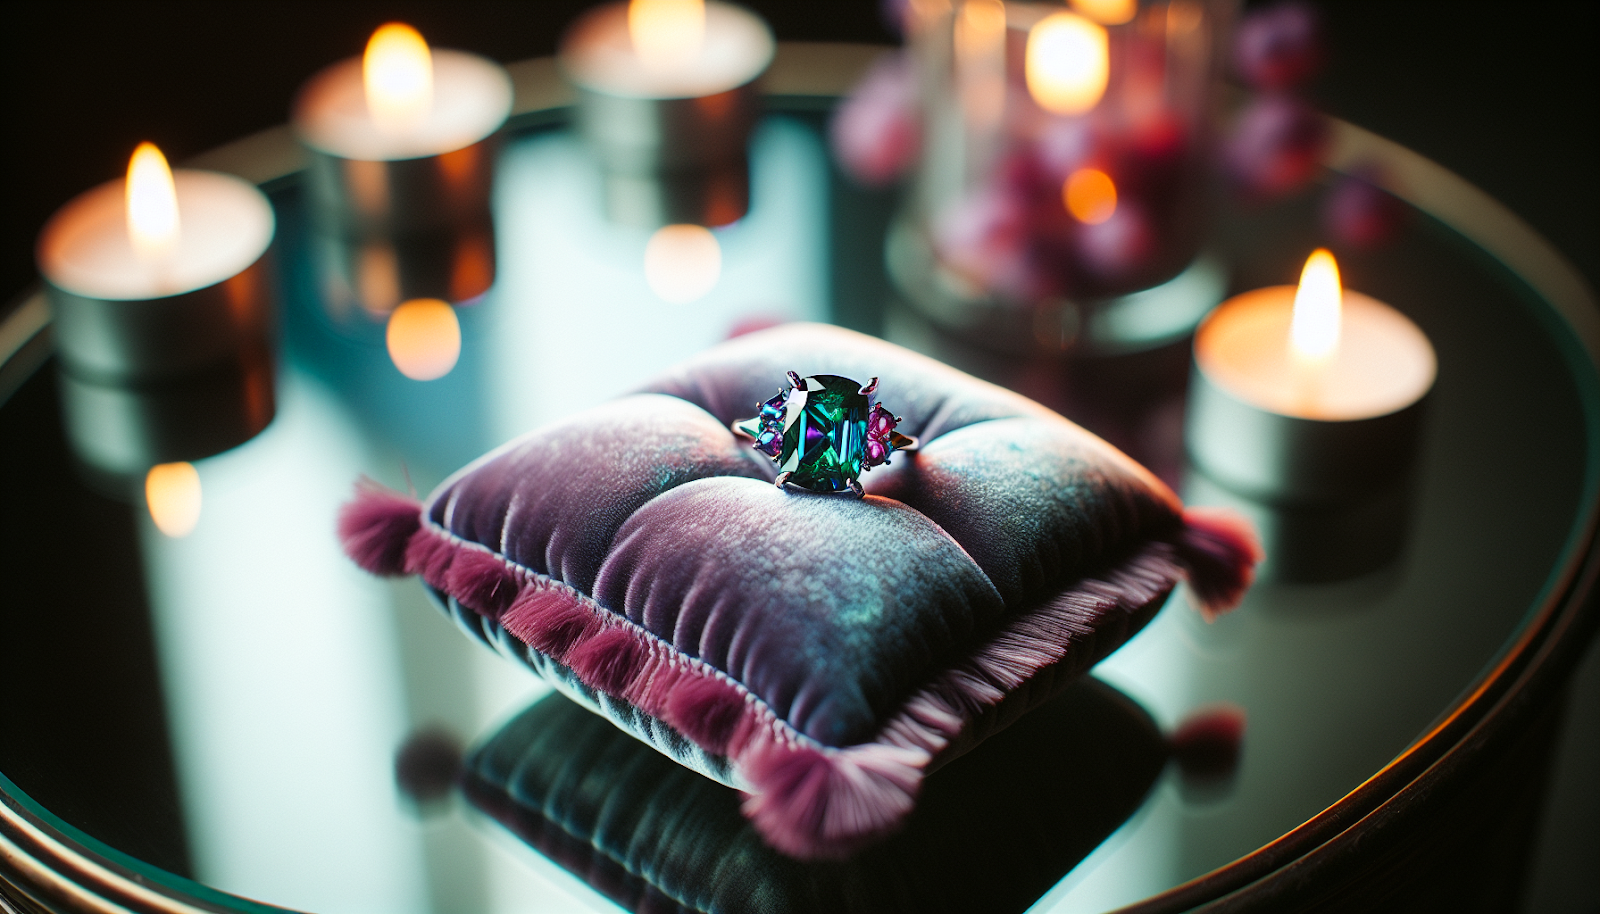 A vibrant alexandrite engagement ring symbolizing love and uniqueness